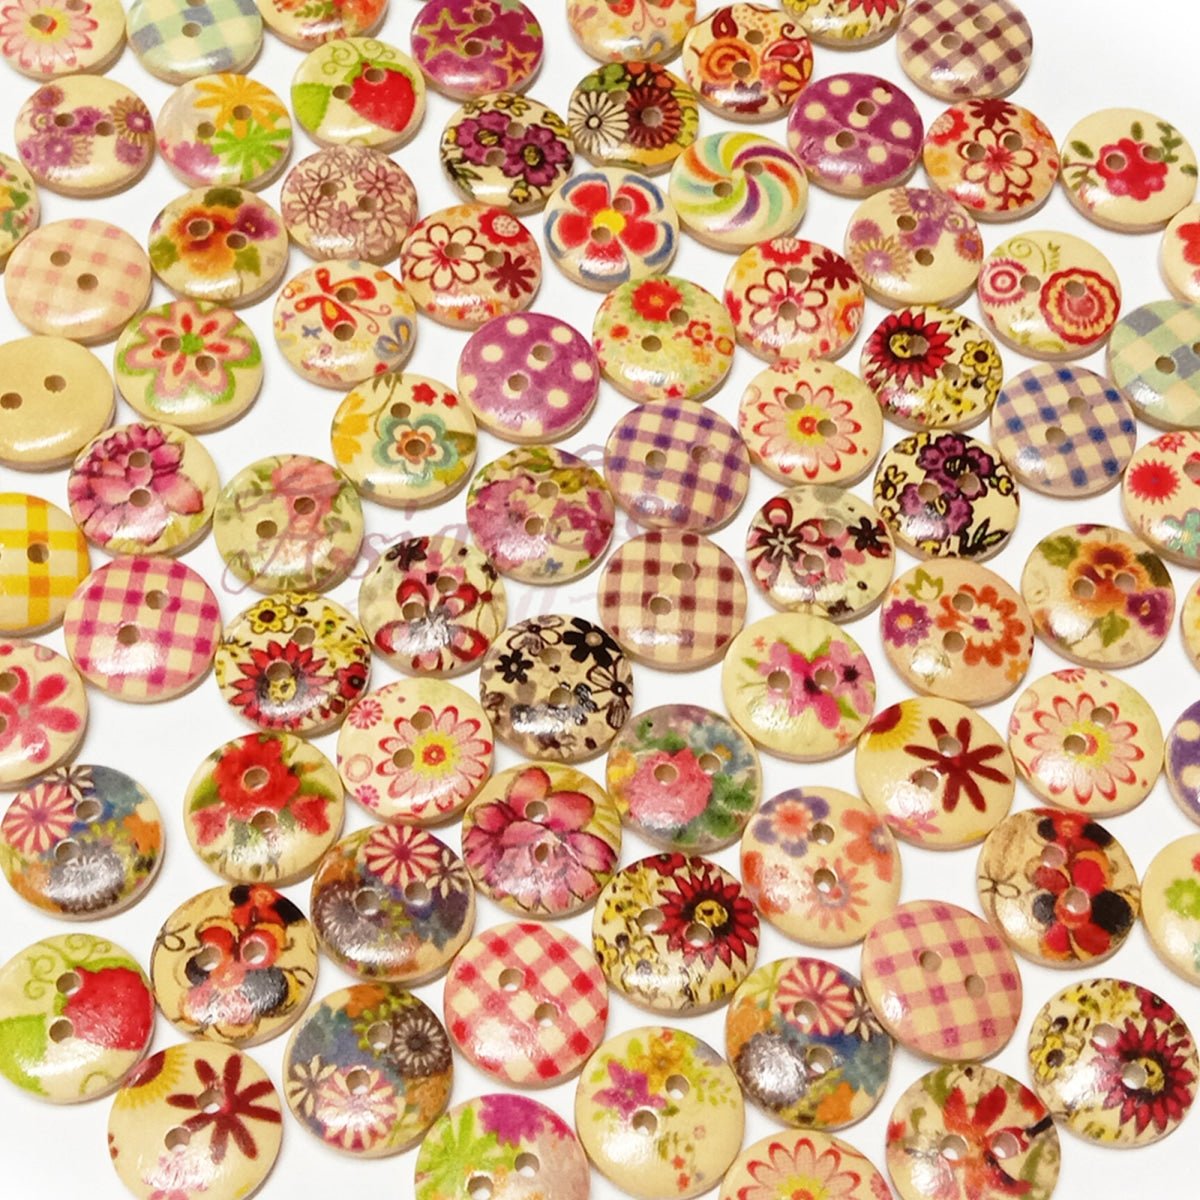 100pcs Mixed Wooden Buttons Flower for Clothing Craft Sewing DIY 2 Hole 15mm - Flowers 1 - - Asia Sell